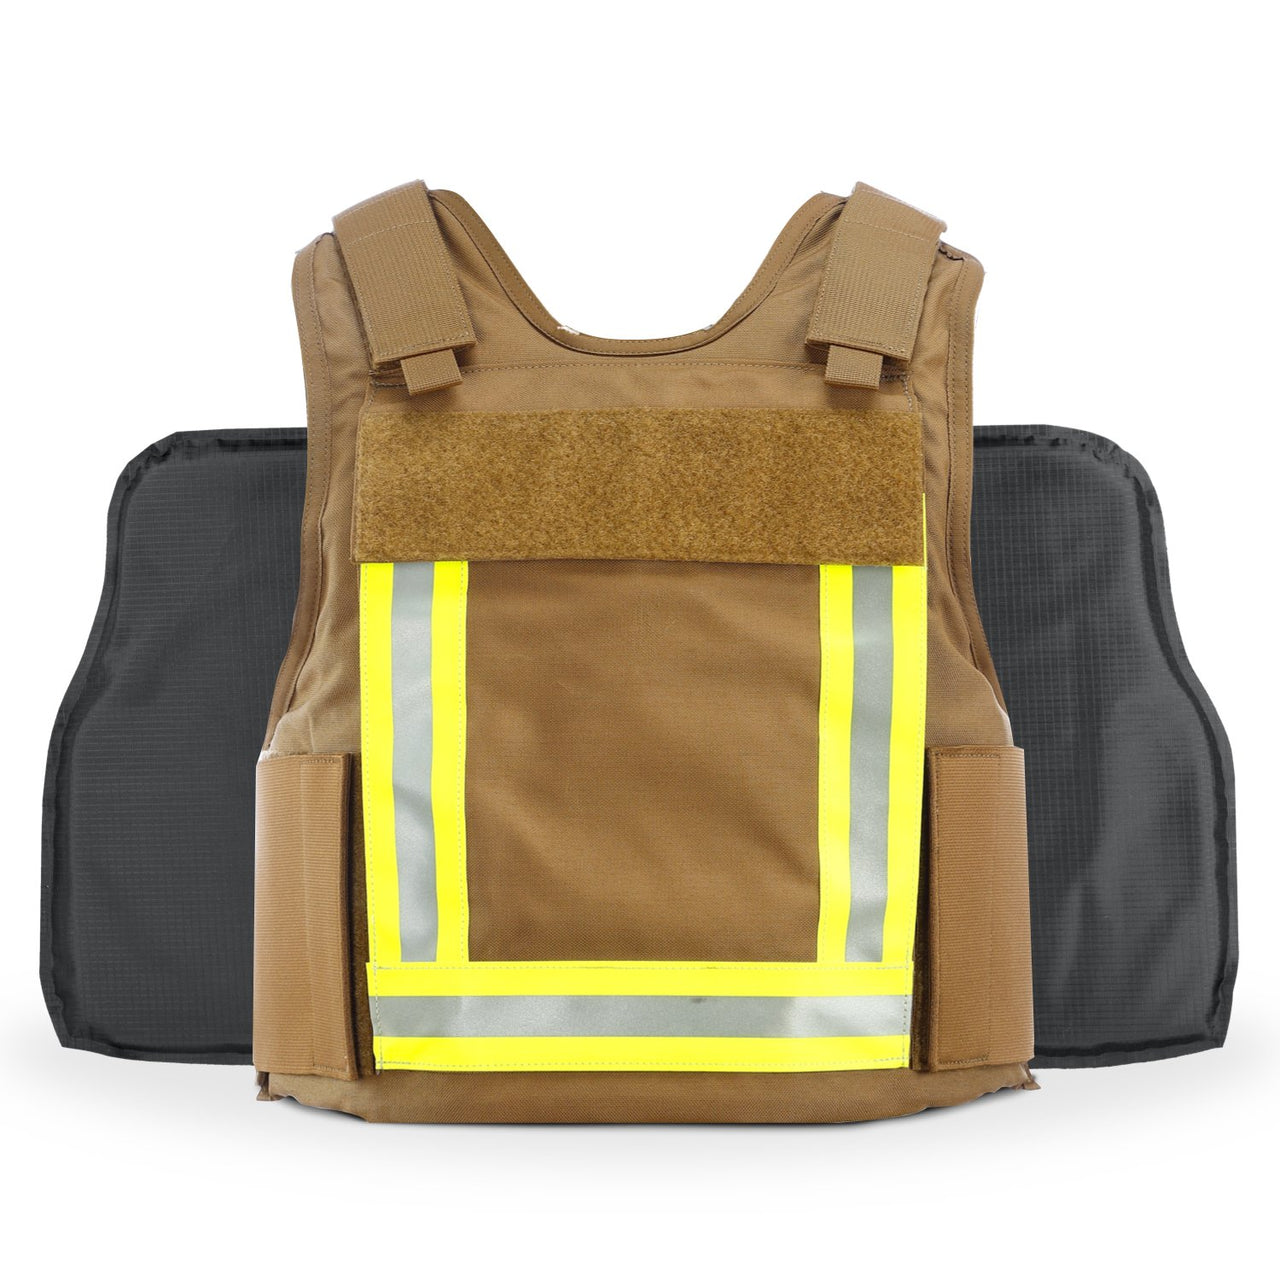 A Body Armor Direct Fireman Tactical Multi-Threat Vest with reflective strips on it.